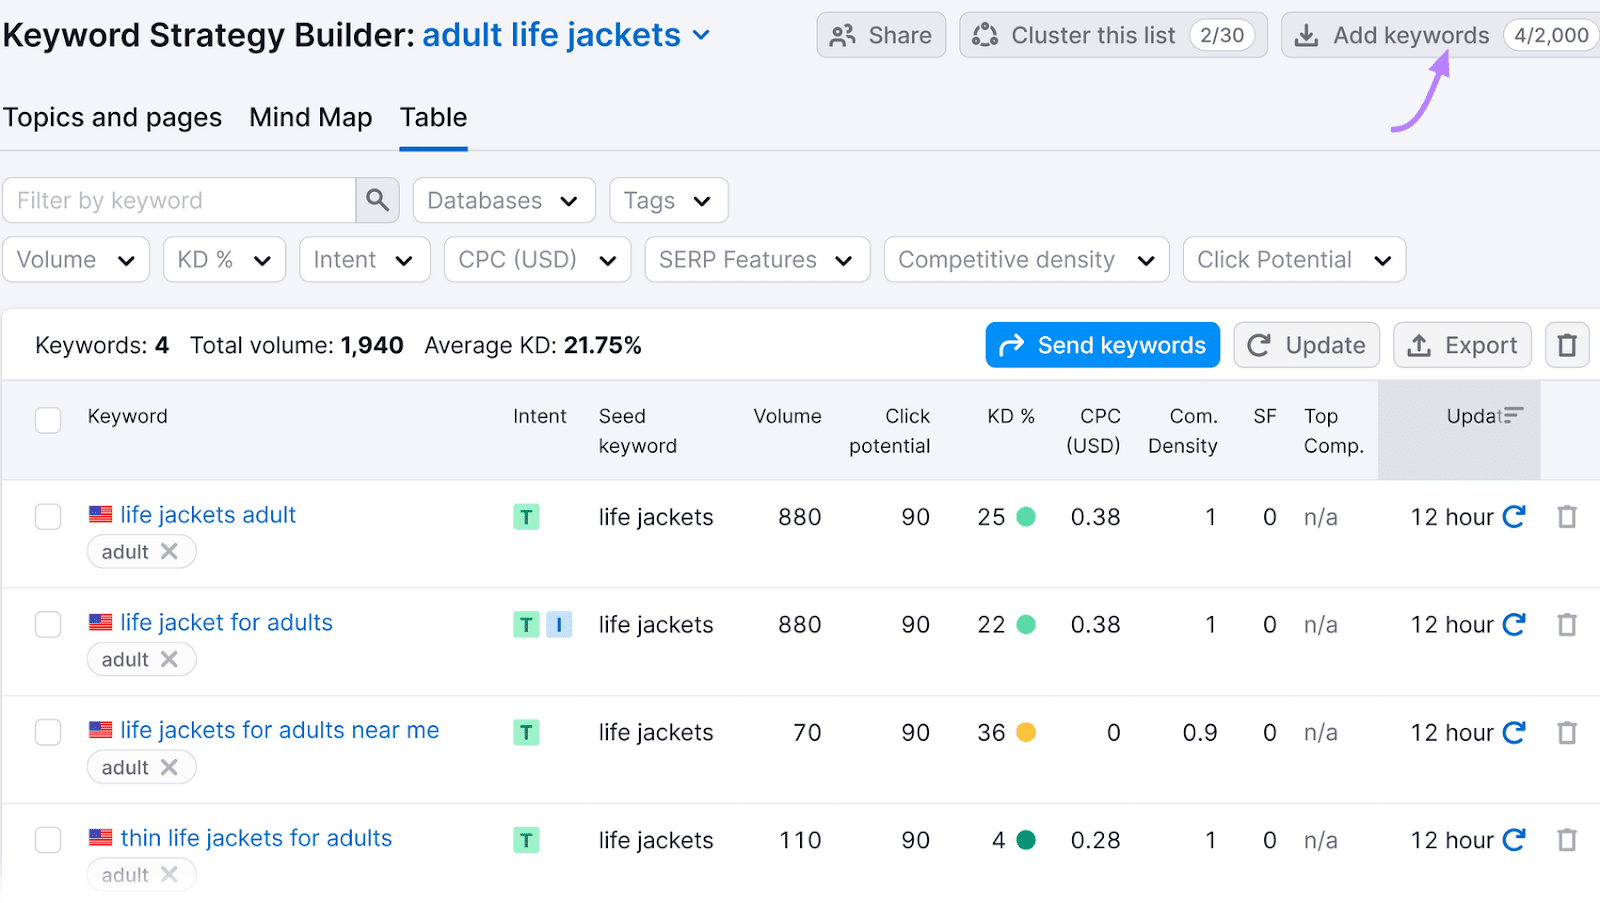 Keyword Strategy Builder interface showing data related to "adult life jackets," with a focus on the "Add keywords" button.